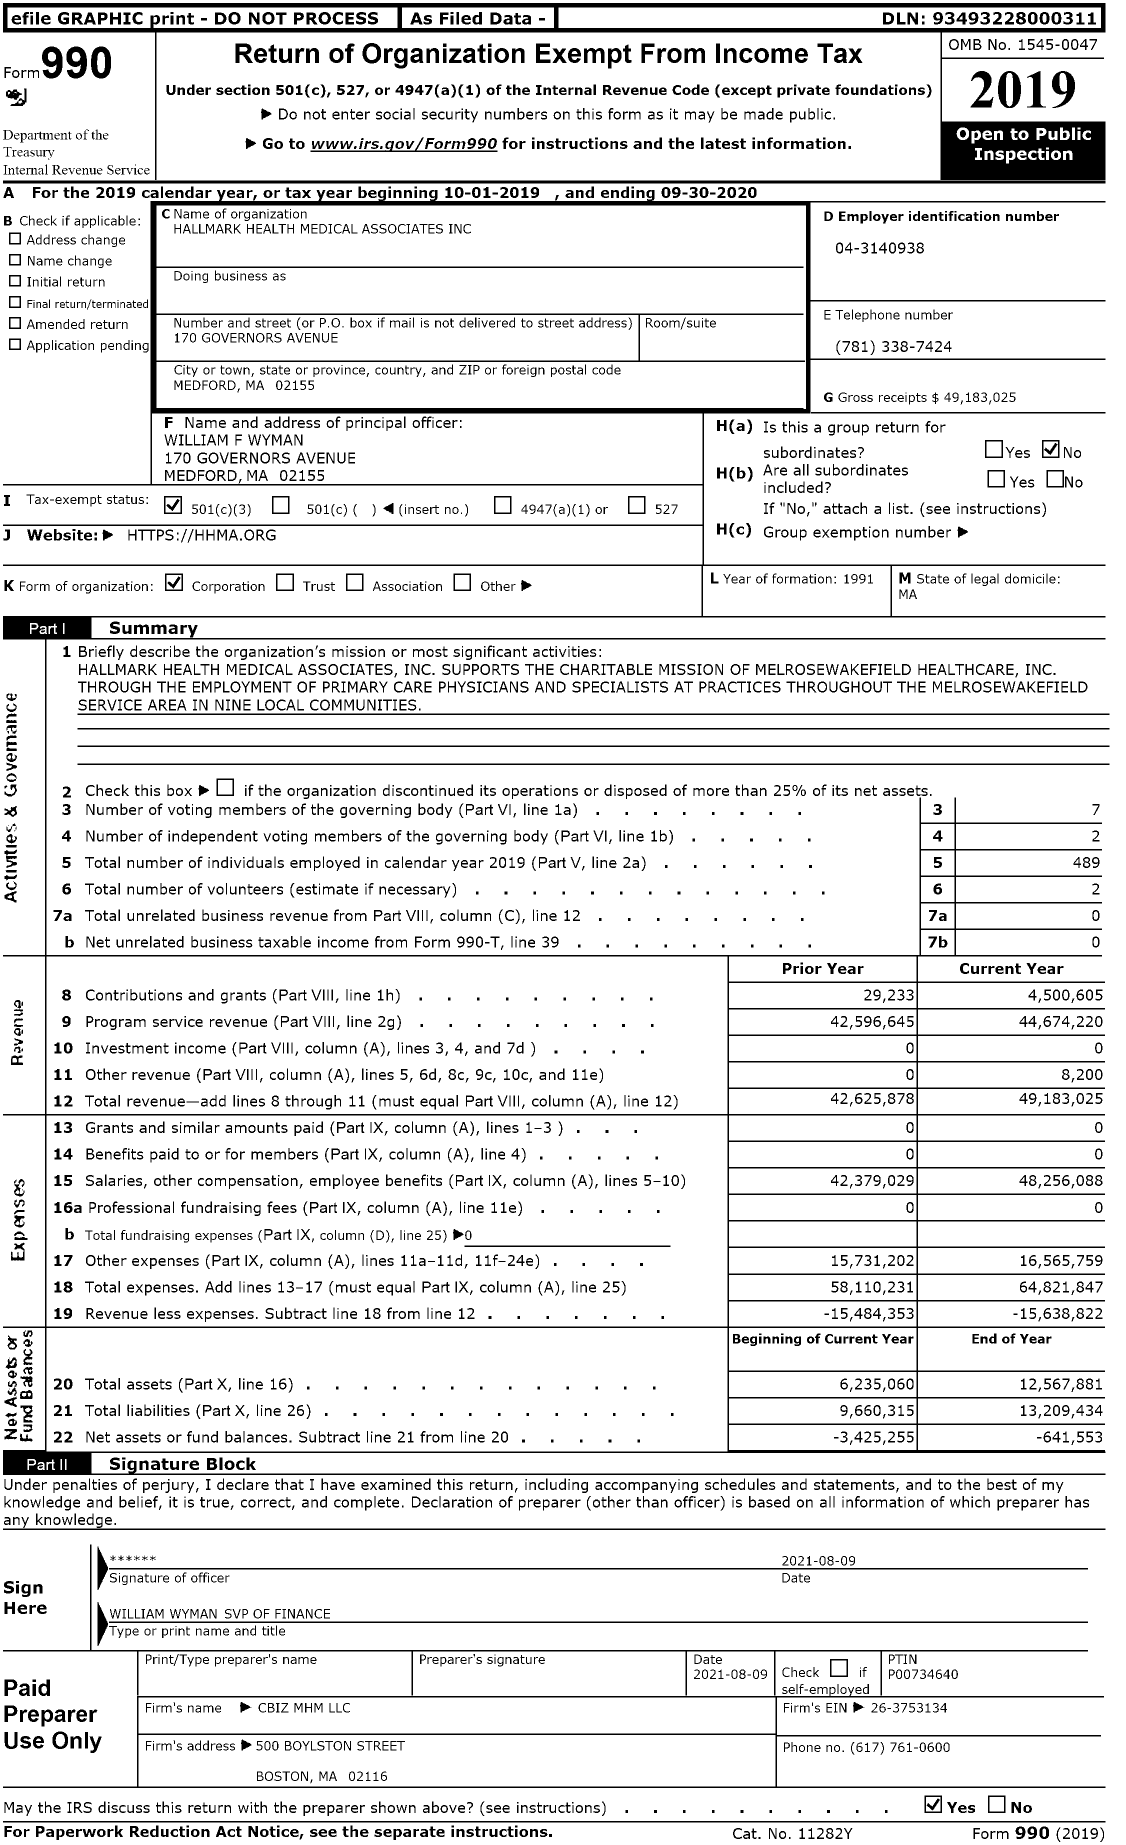 Image of first page of 2019 Form 990 for Hallmark Health Medical Associates (HHMA)